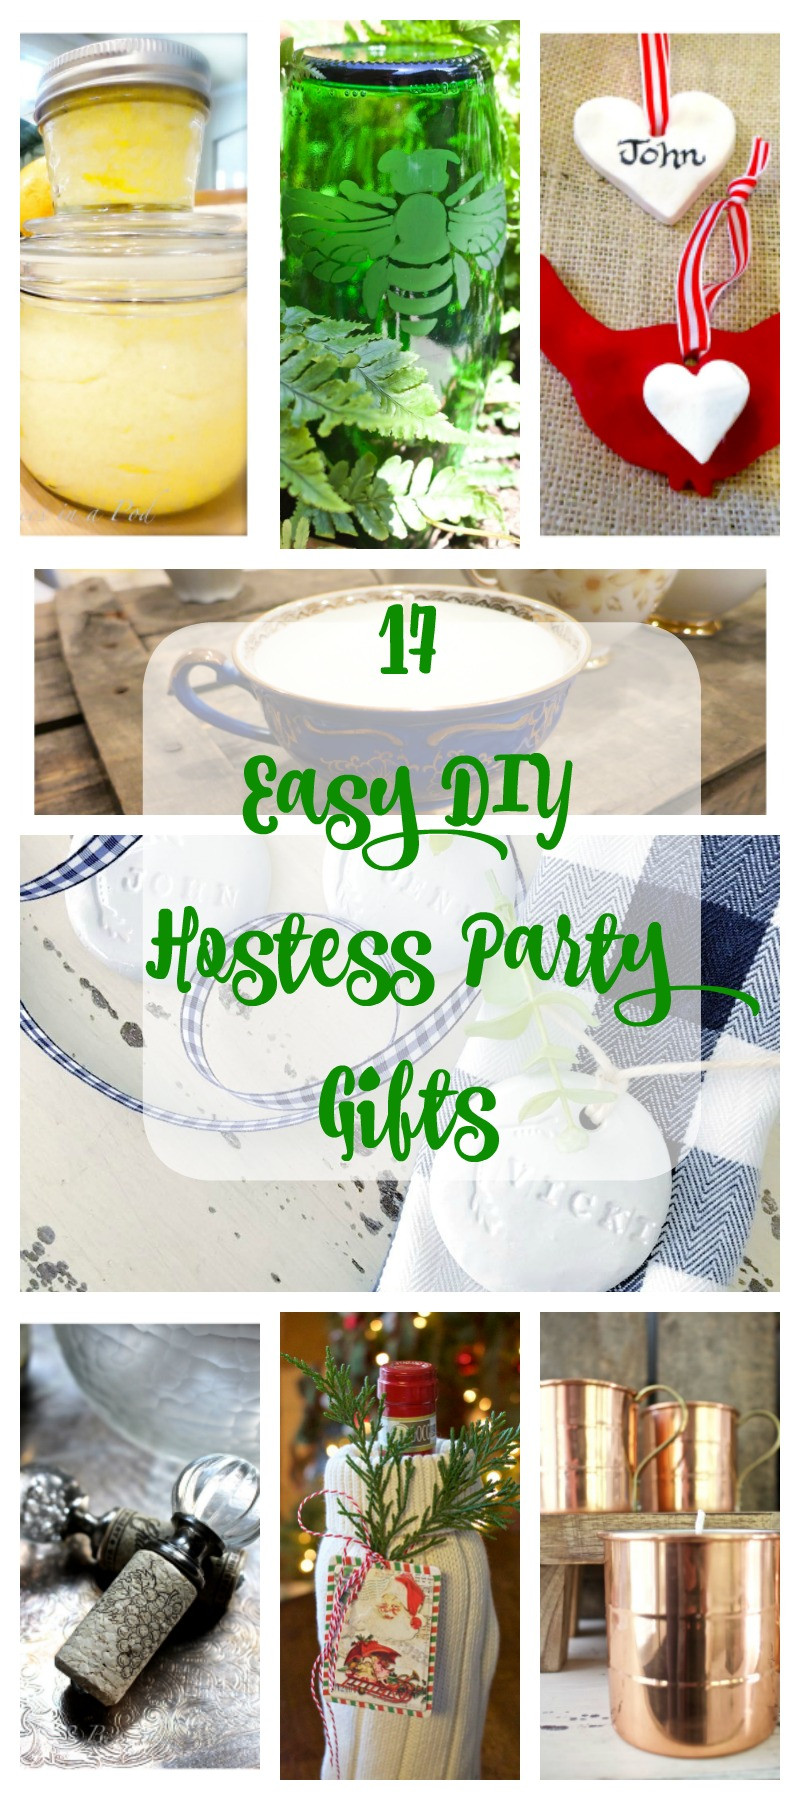 Hostess Gift Ideas For Holiday Party
 17 Ideas for Easy DIY Holiday Hostess Gifts 2 Bees in a Pod